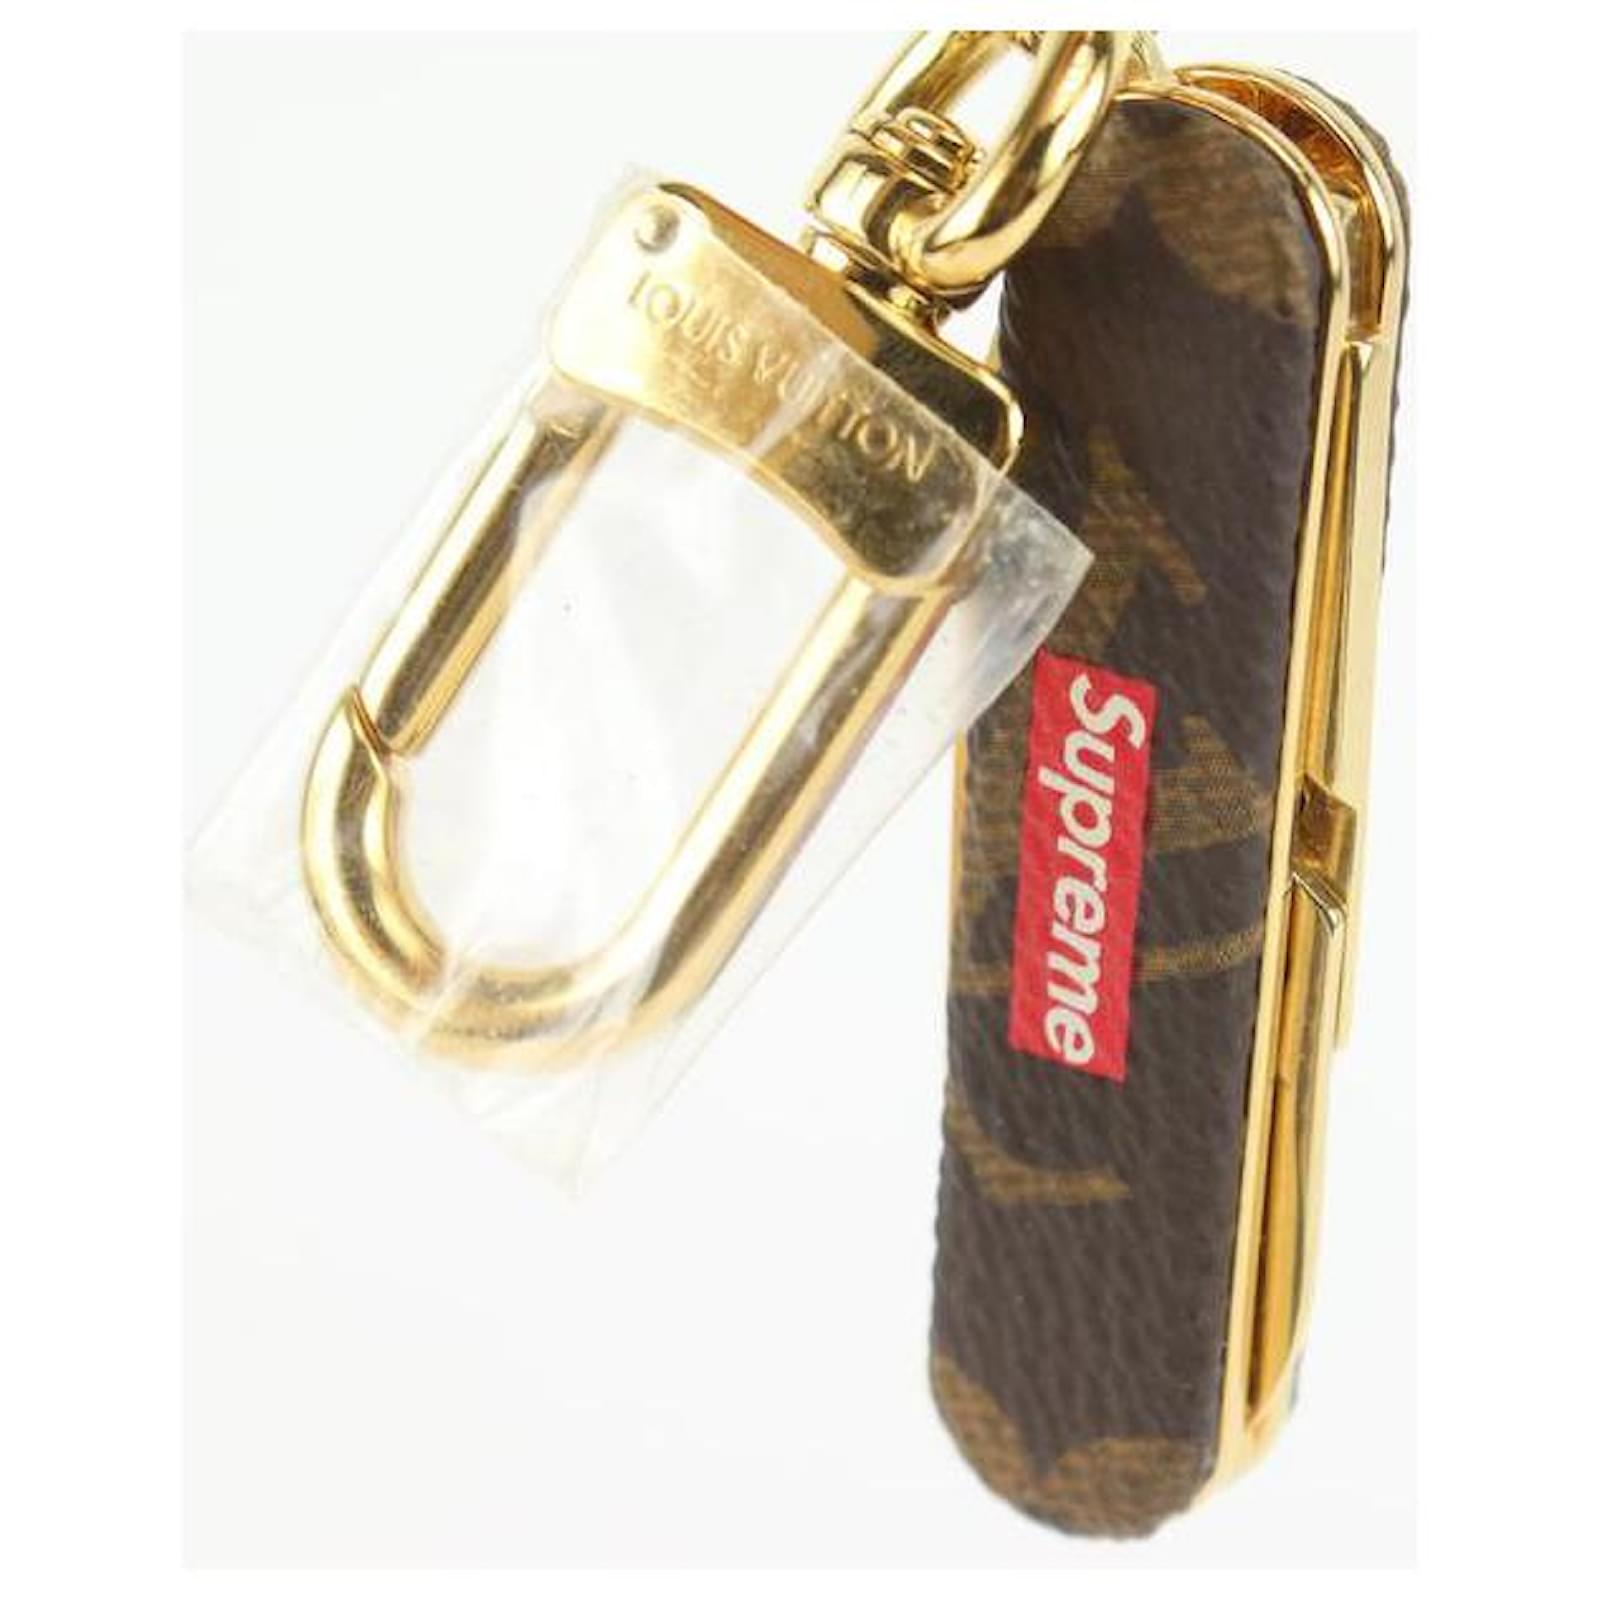 Louis Vuitton x Supreme Pocket Knife Key Chain Red in Leather with